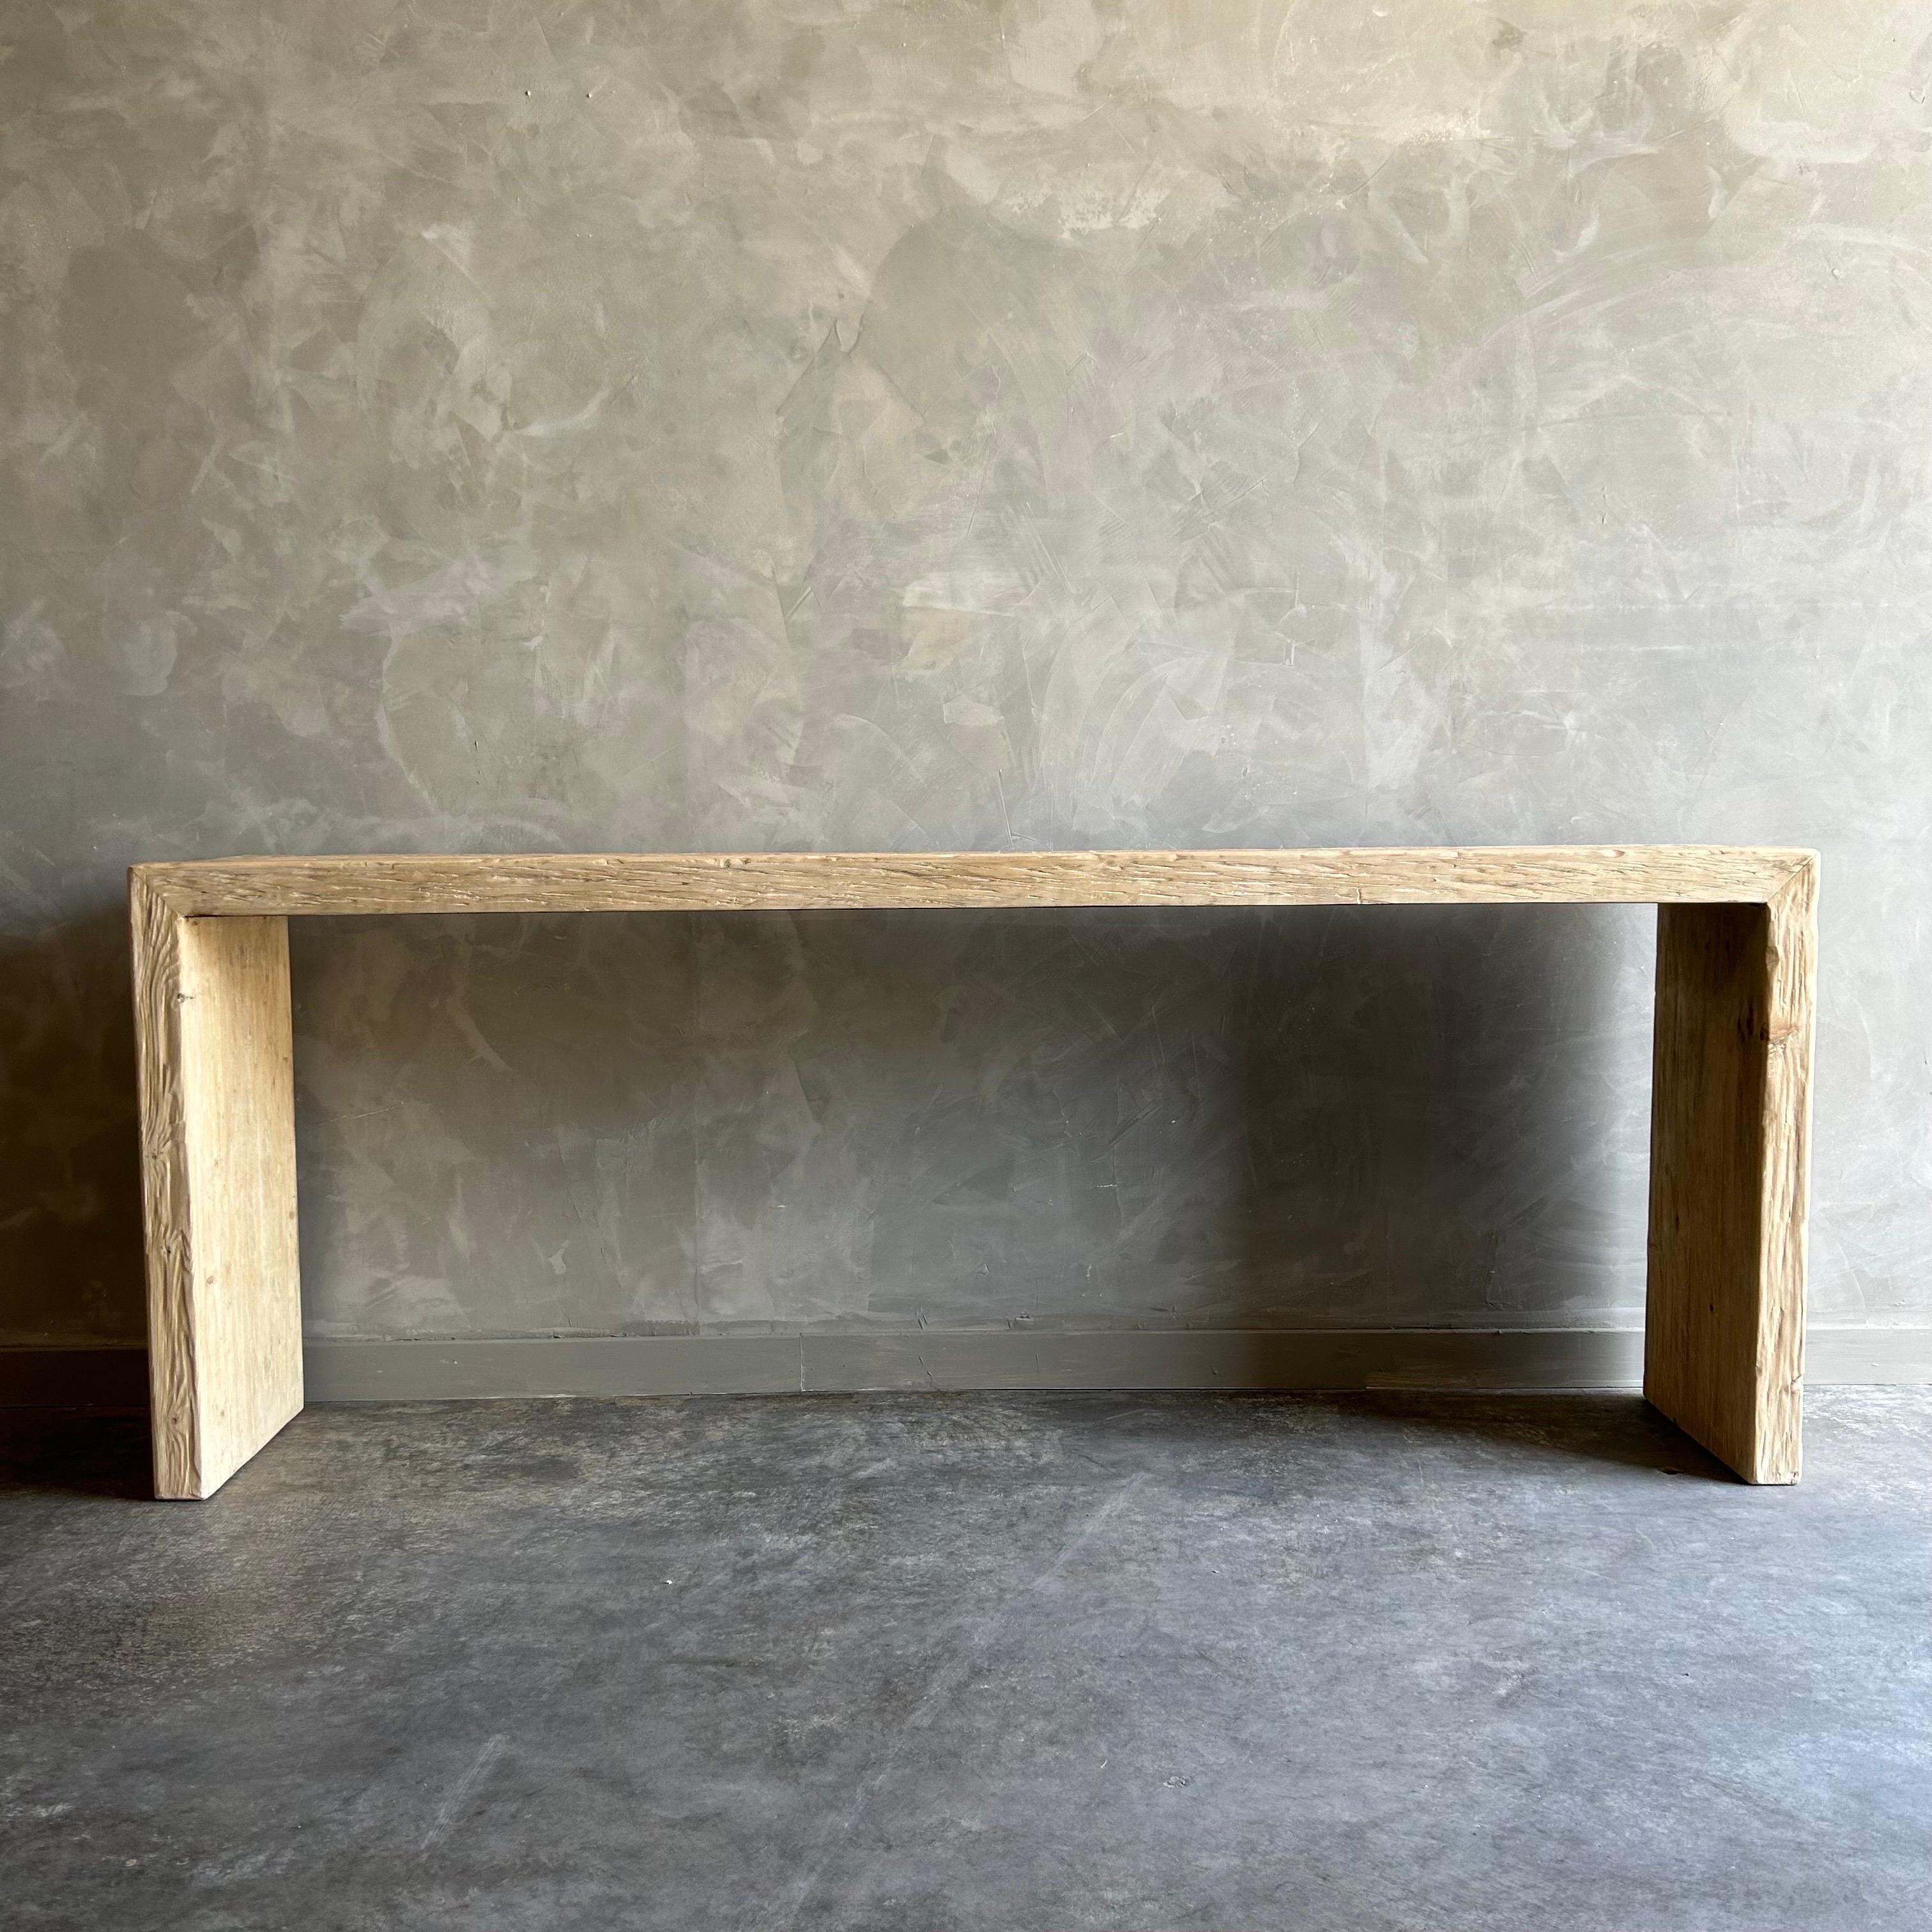 Bloom Home Inc. has over 2000 items in stock ready, scroll down to view all of our items!
Size: 87”w x 15.5”d x 33.5”h
These old elm timbers show in its most primal, natural form. The artisanal construction methods highlight the elm woods beautiful